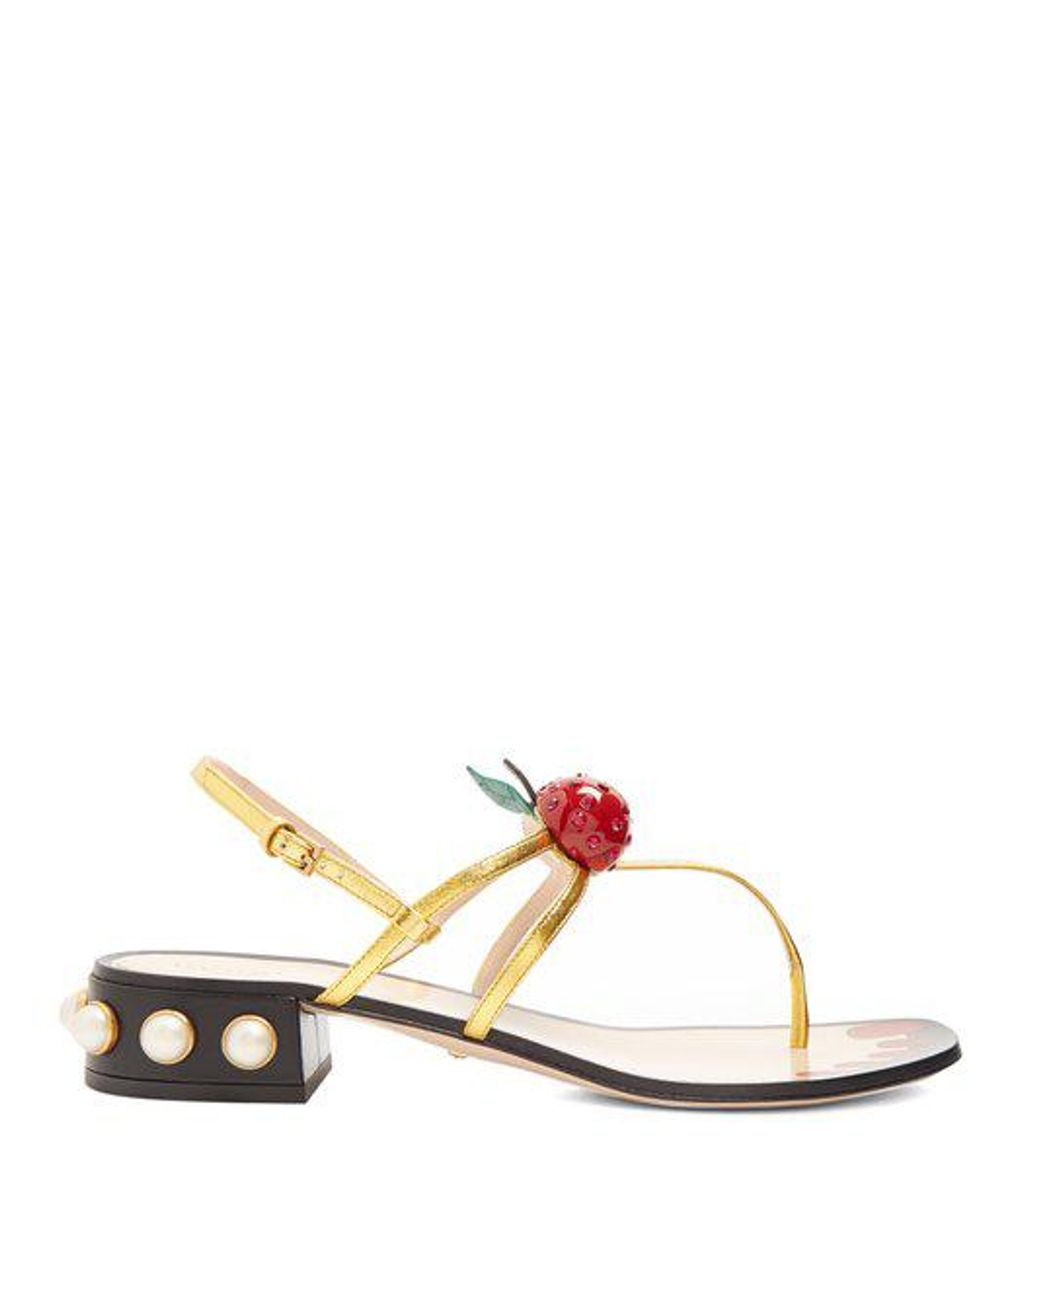 Gucci Hatsumomo Cherry-embellished Leather Sandals in Metallic | Lyst